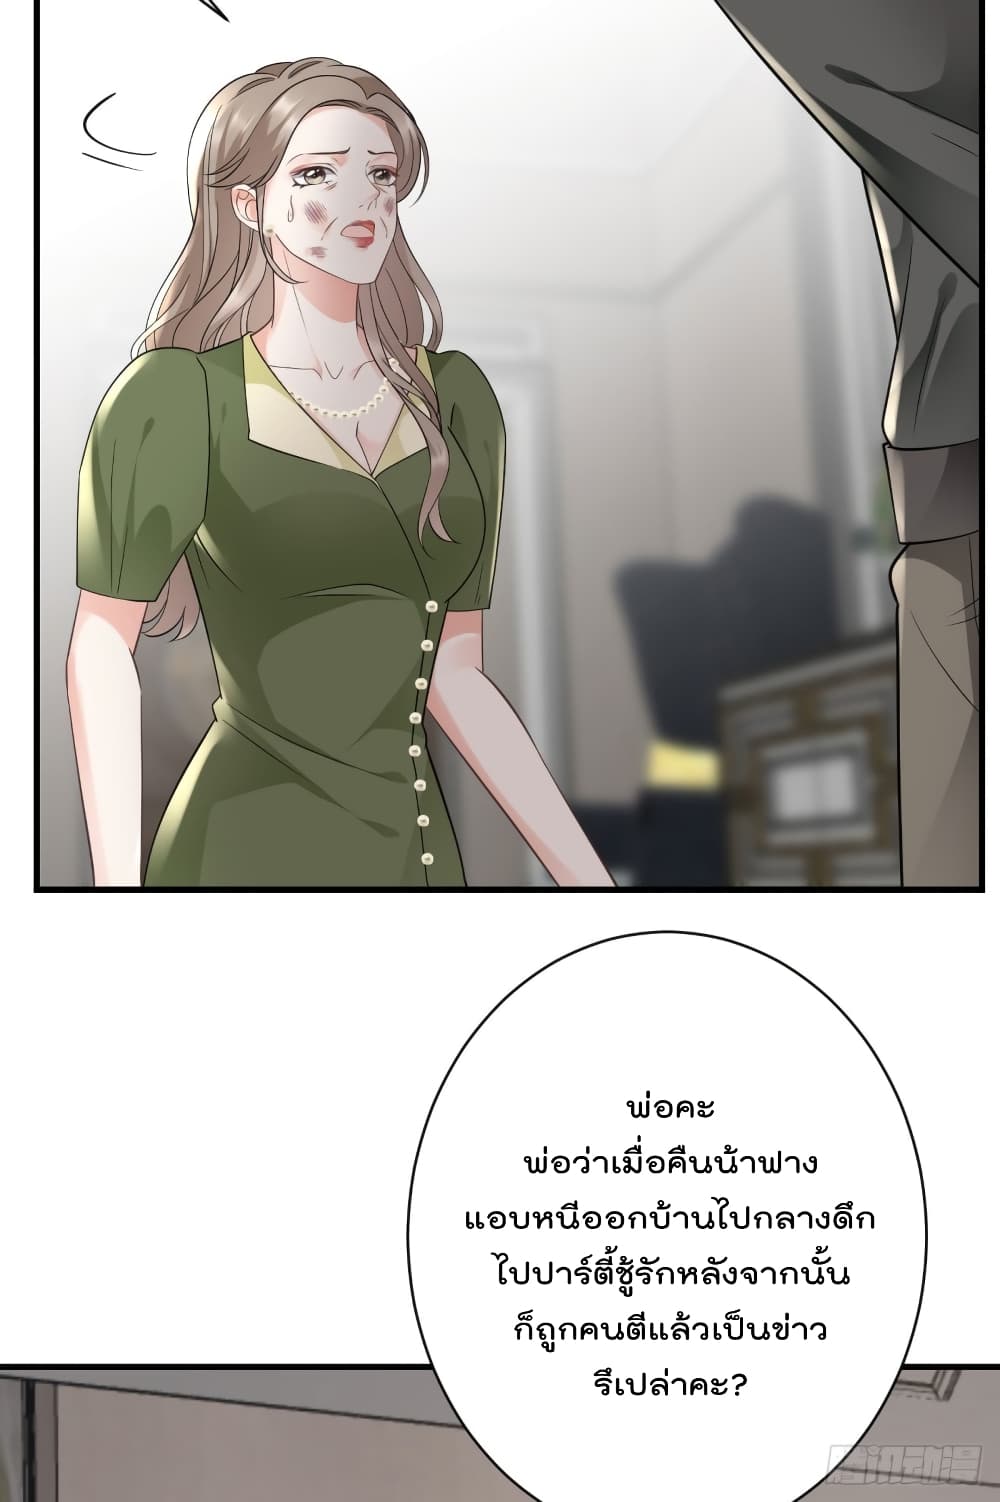 What Can the Eldest Lady Have คุณหนูใหญ่ ทำไมคุณร้ายอย่างนี้ 28-28